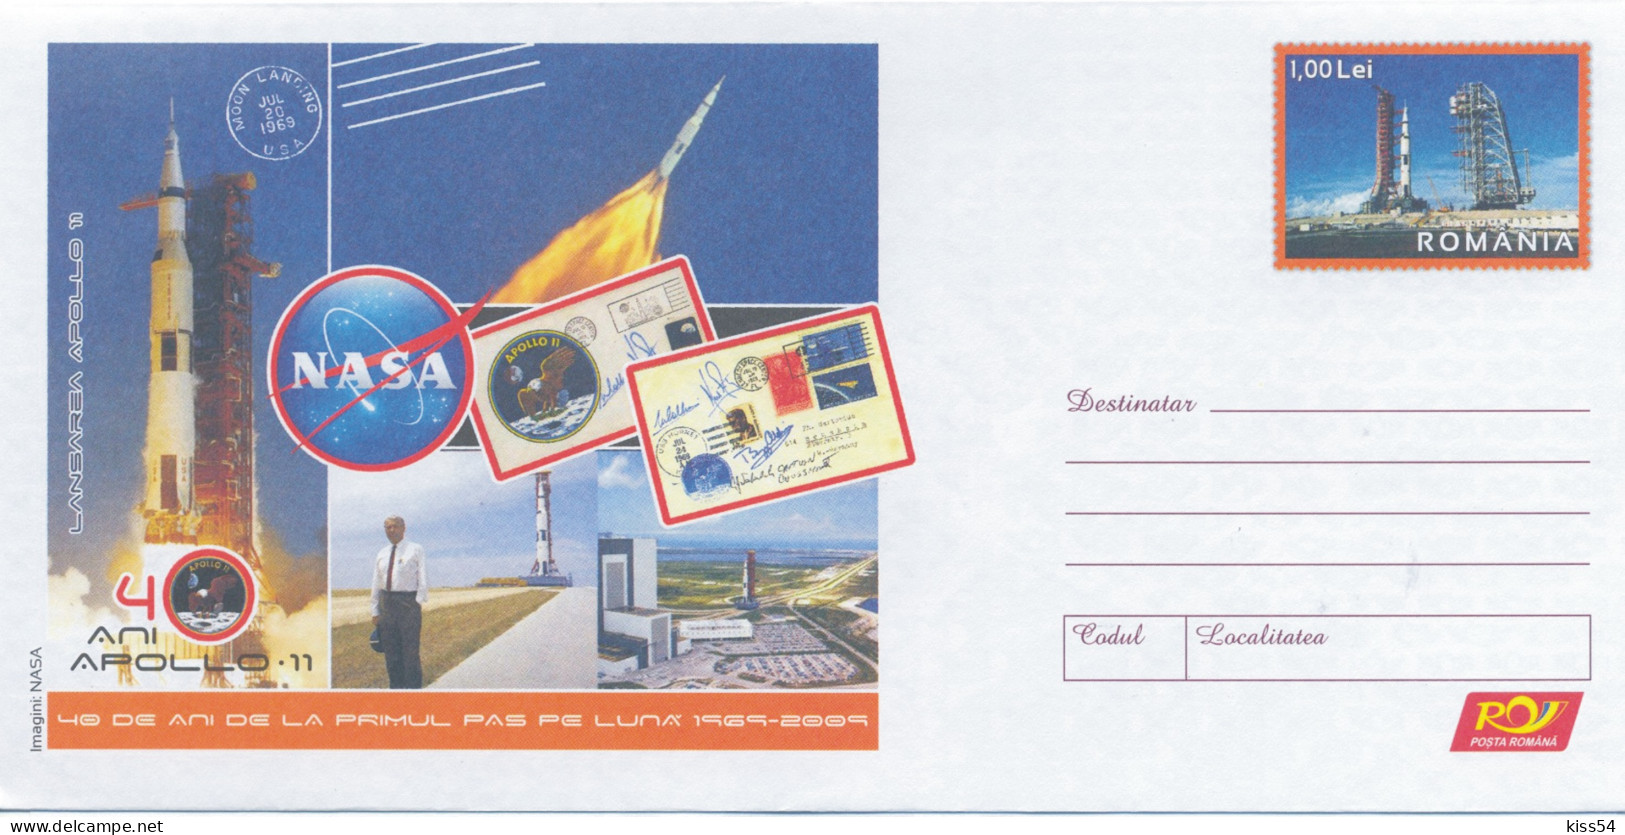 IP 2009 - 30 Cosmos, 40 YEARS SINCE DE FIRST STEP ON THE MOON - Stationery - Unused - 2009 - Postal Stationery